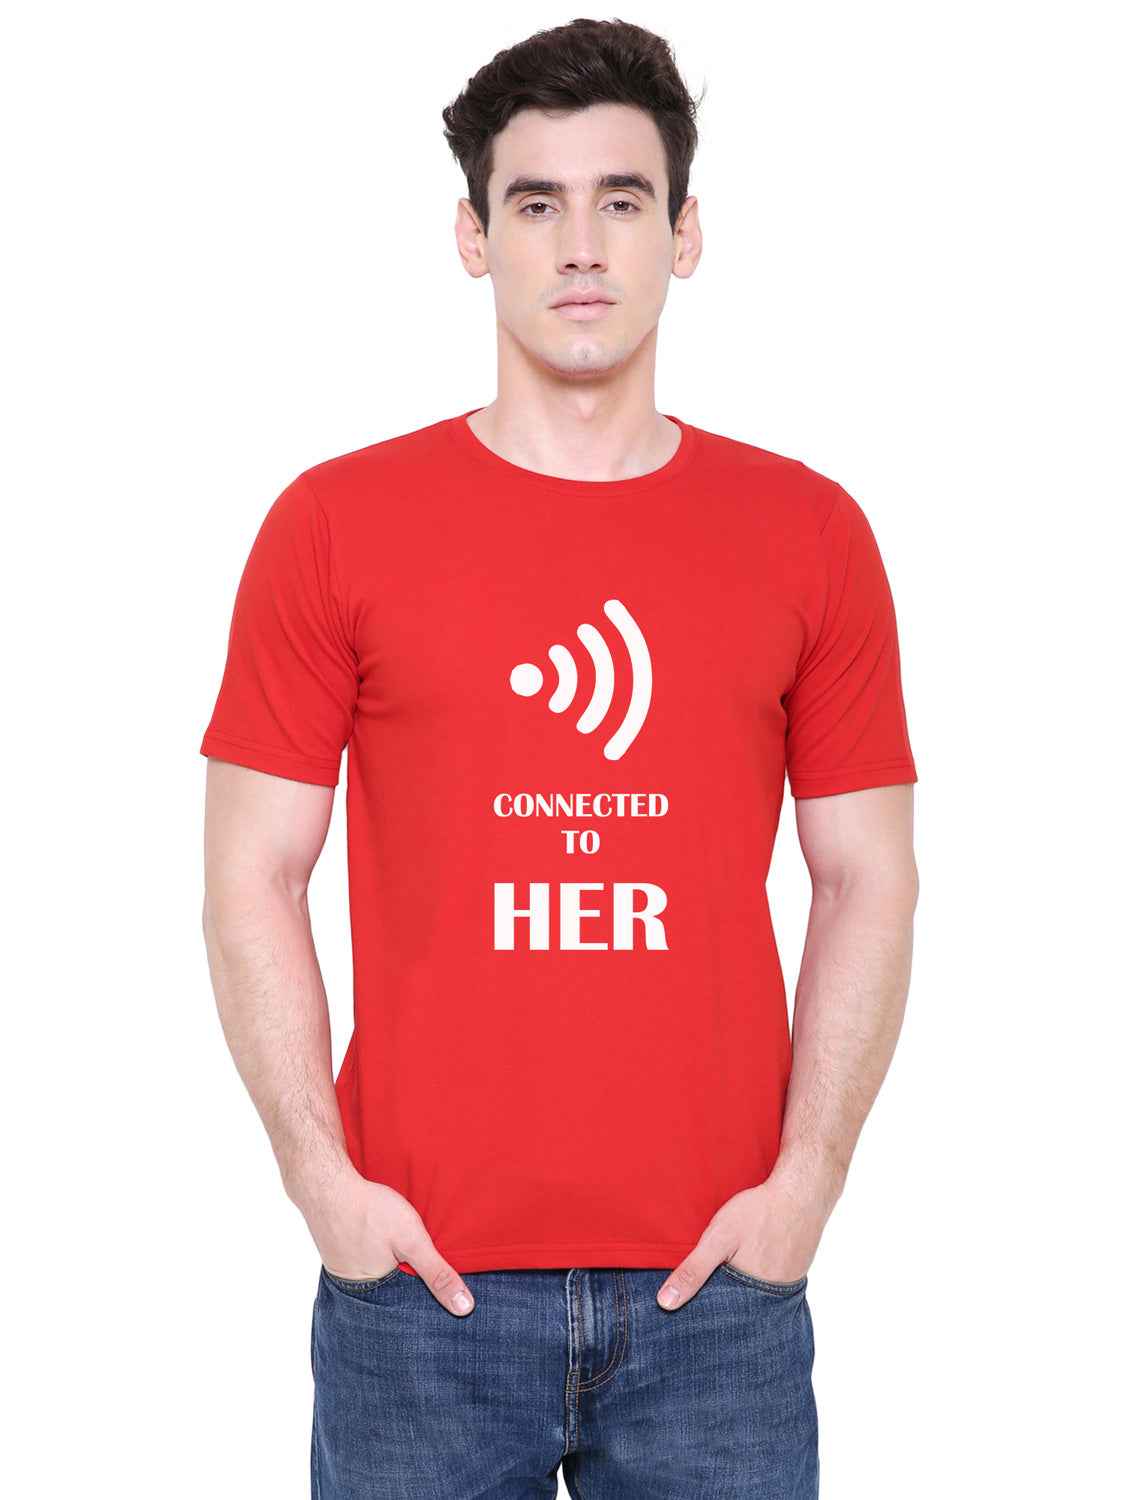 Connected to him/her  matching Couple T shirts- Red